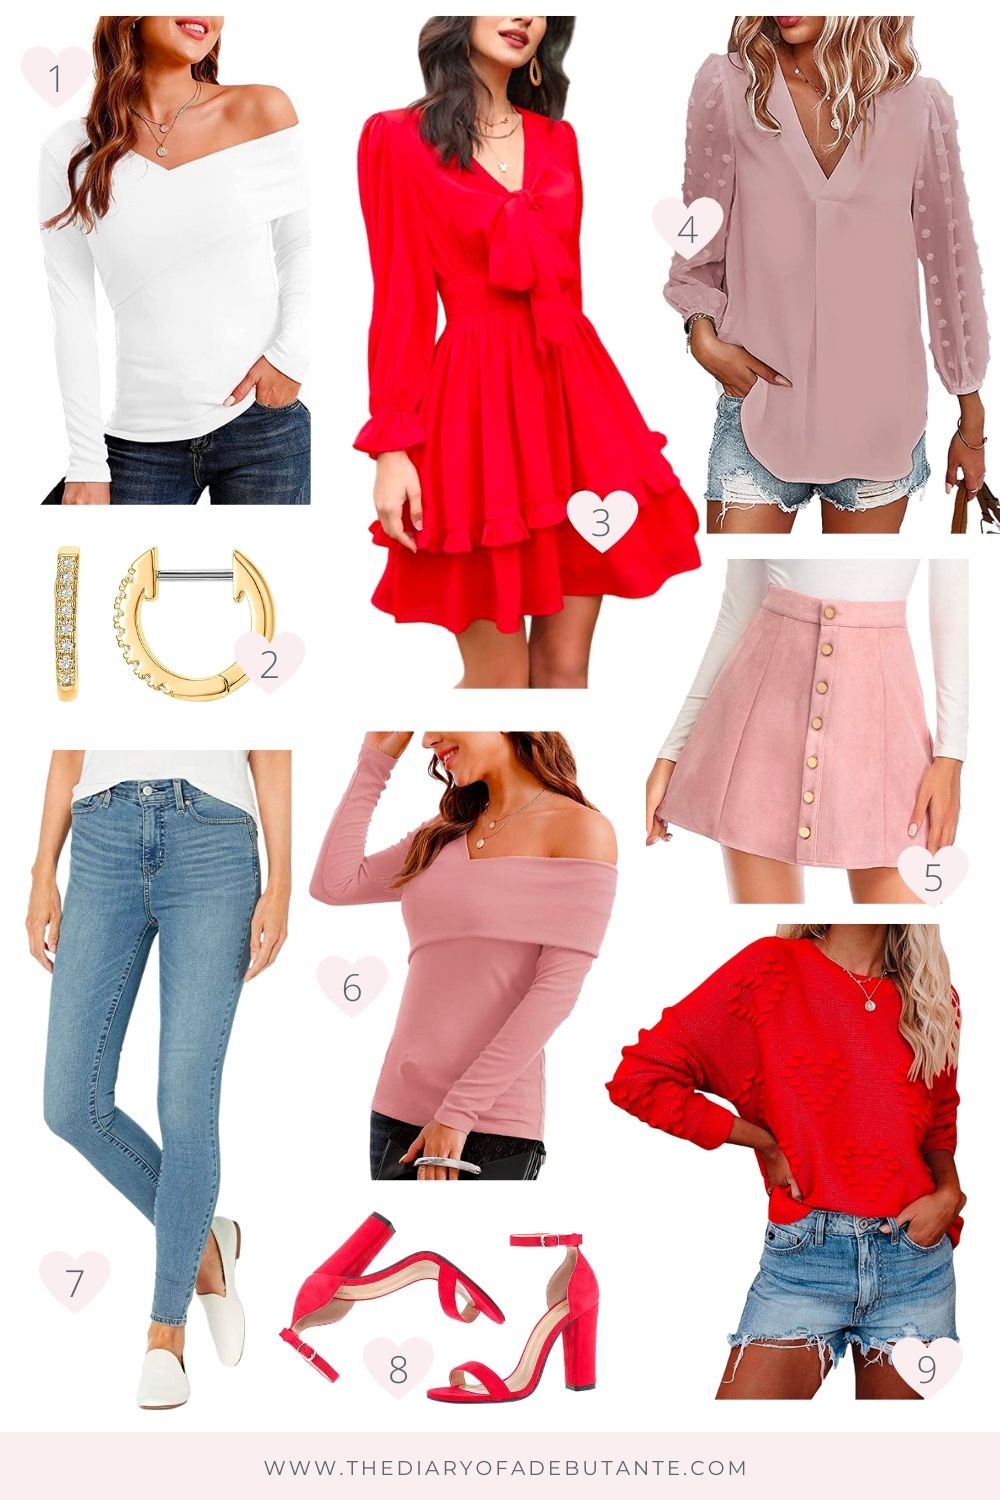 Best Amazon Fashion finds under $50 for Valentine's Day rounded up by blogger Stephanie Ziajka on Diary of a Debutante